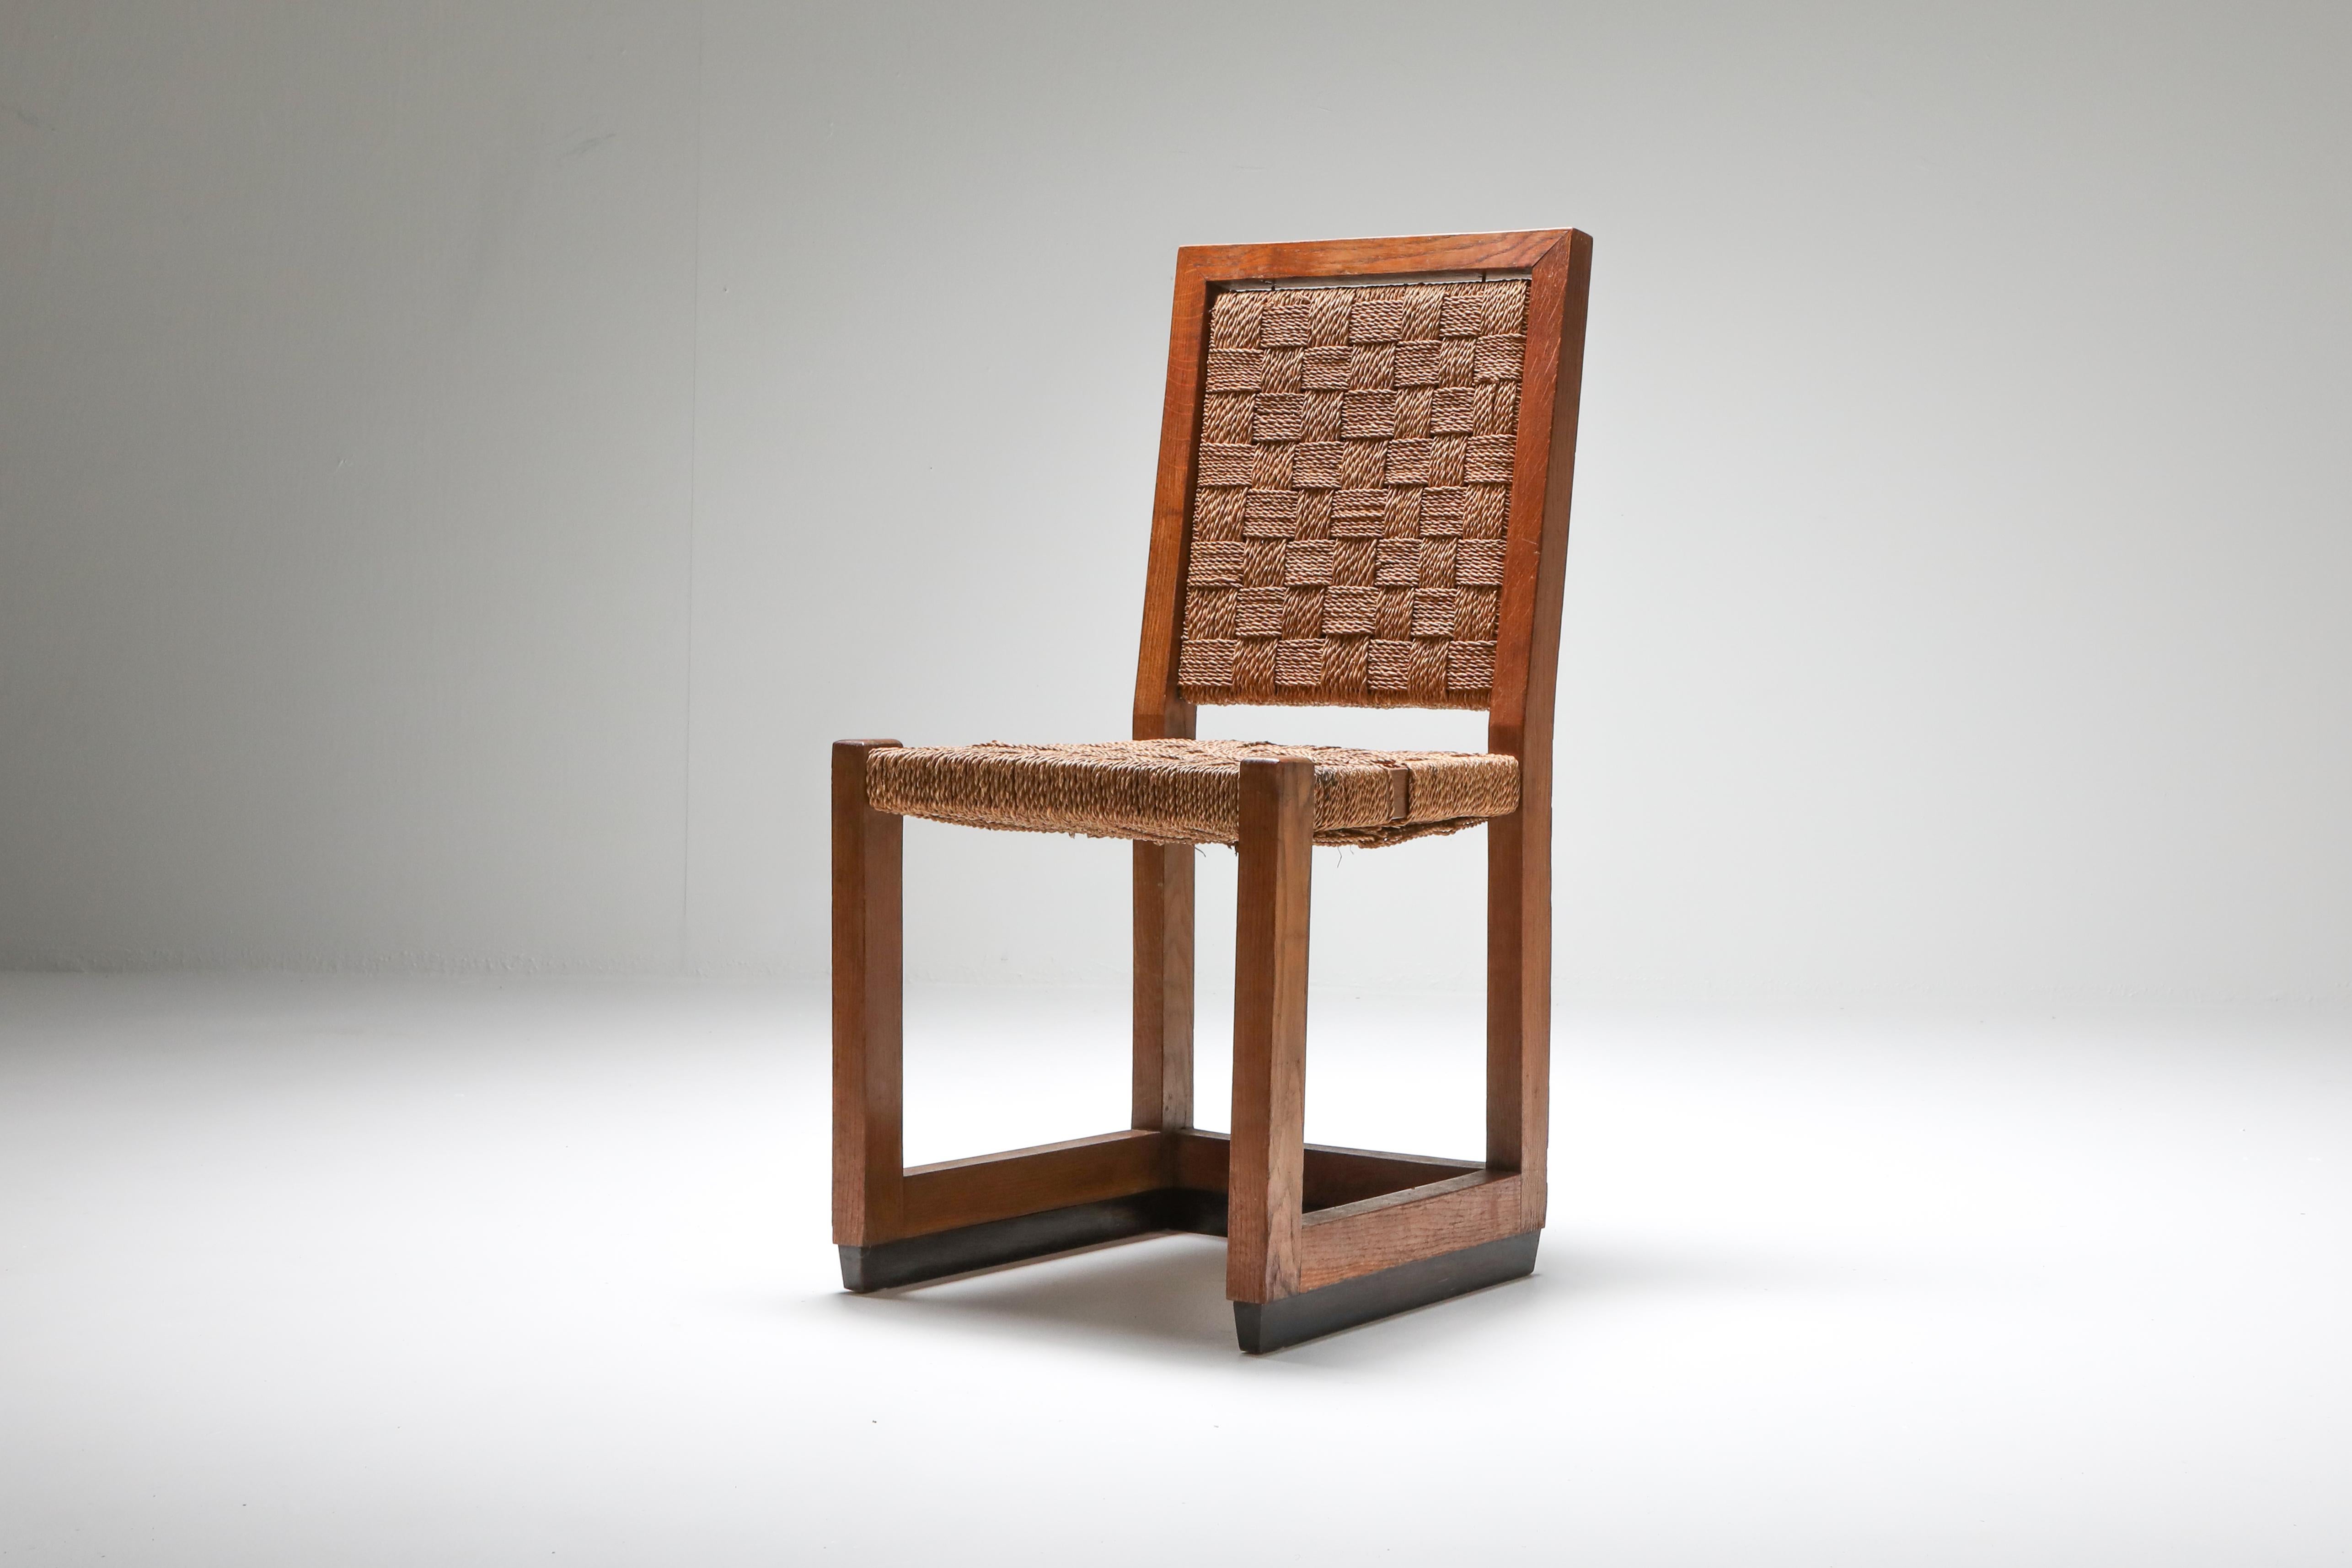 Art Deco era chair from The Netherlands, Hague School, 1920

Minimalist pre modernist piece from solid oak with cord seating.
Would fit well in a rustic modern, wabi sabi interior inspired by Axel Vervoordt.
  